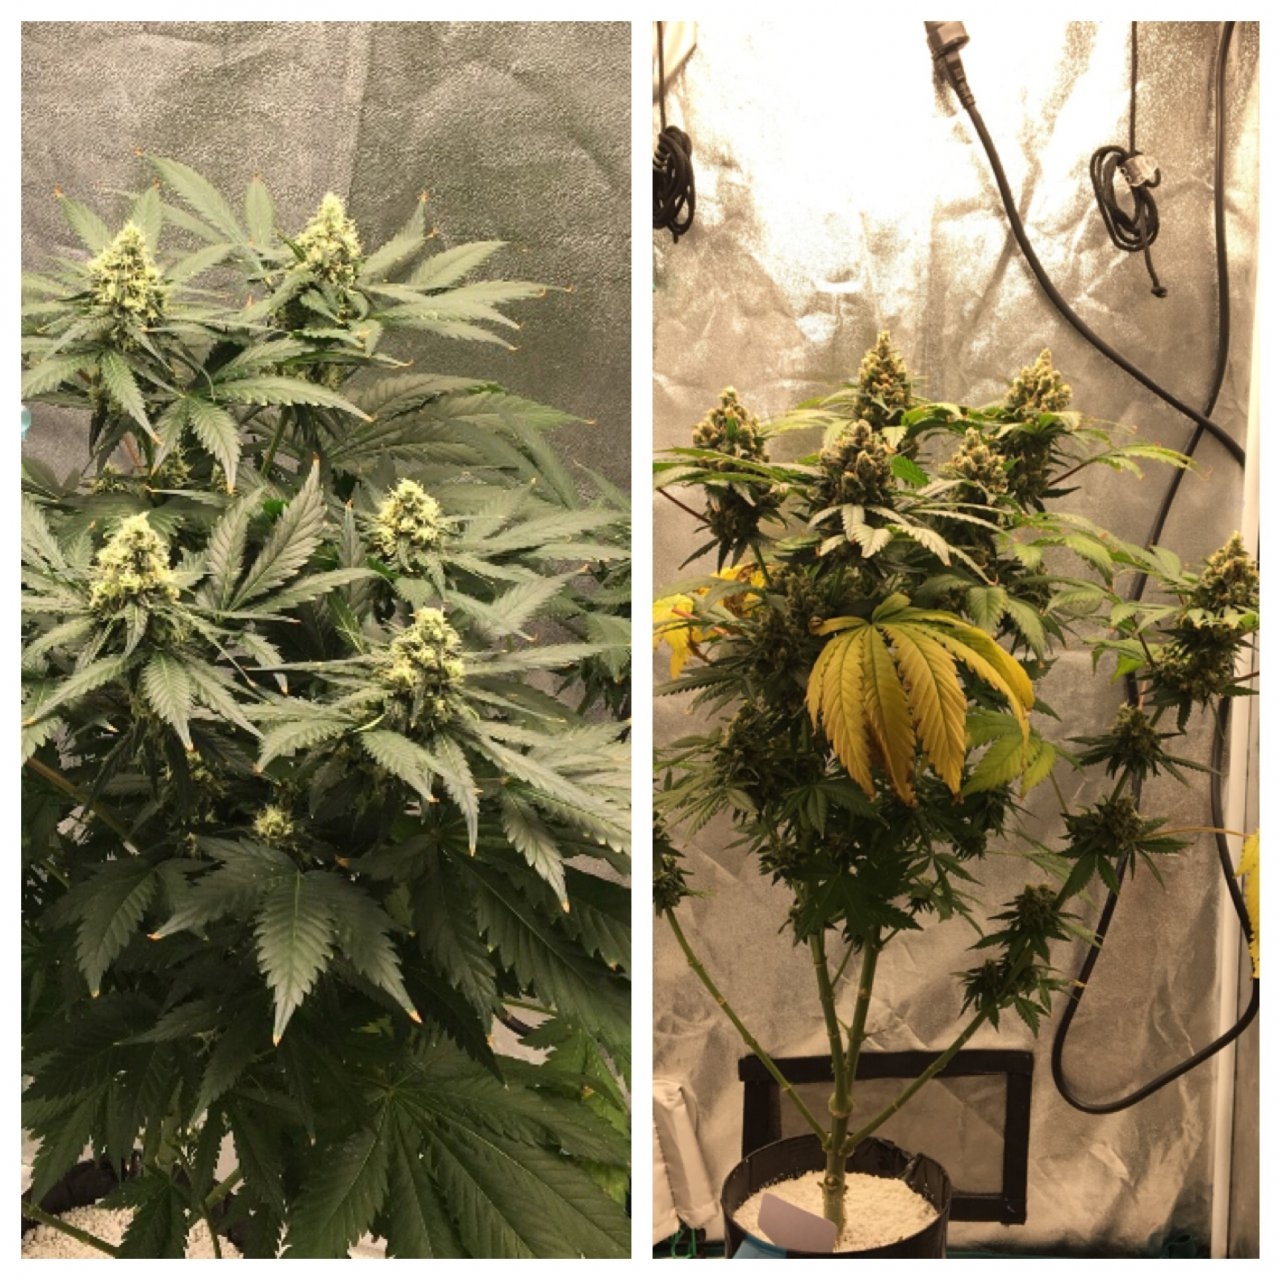 Candy Cane 5: 3 weeks apart